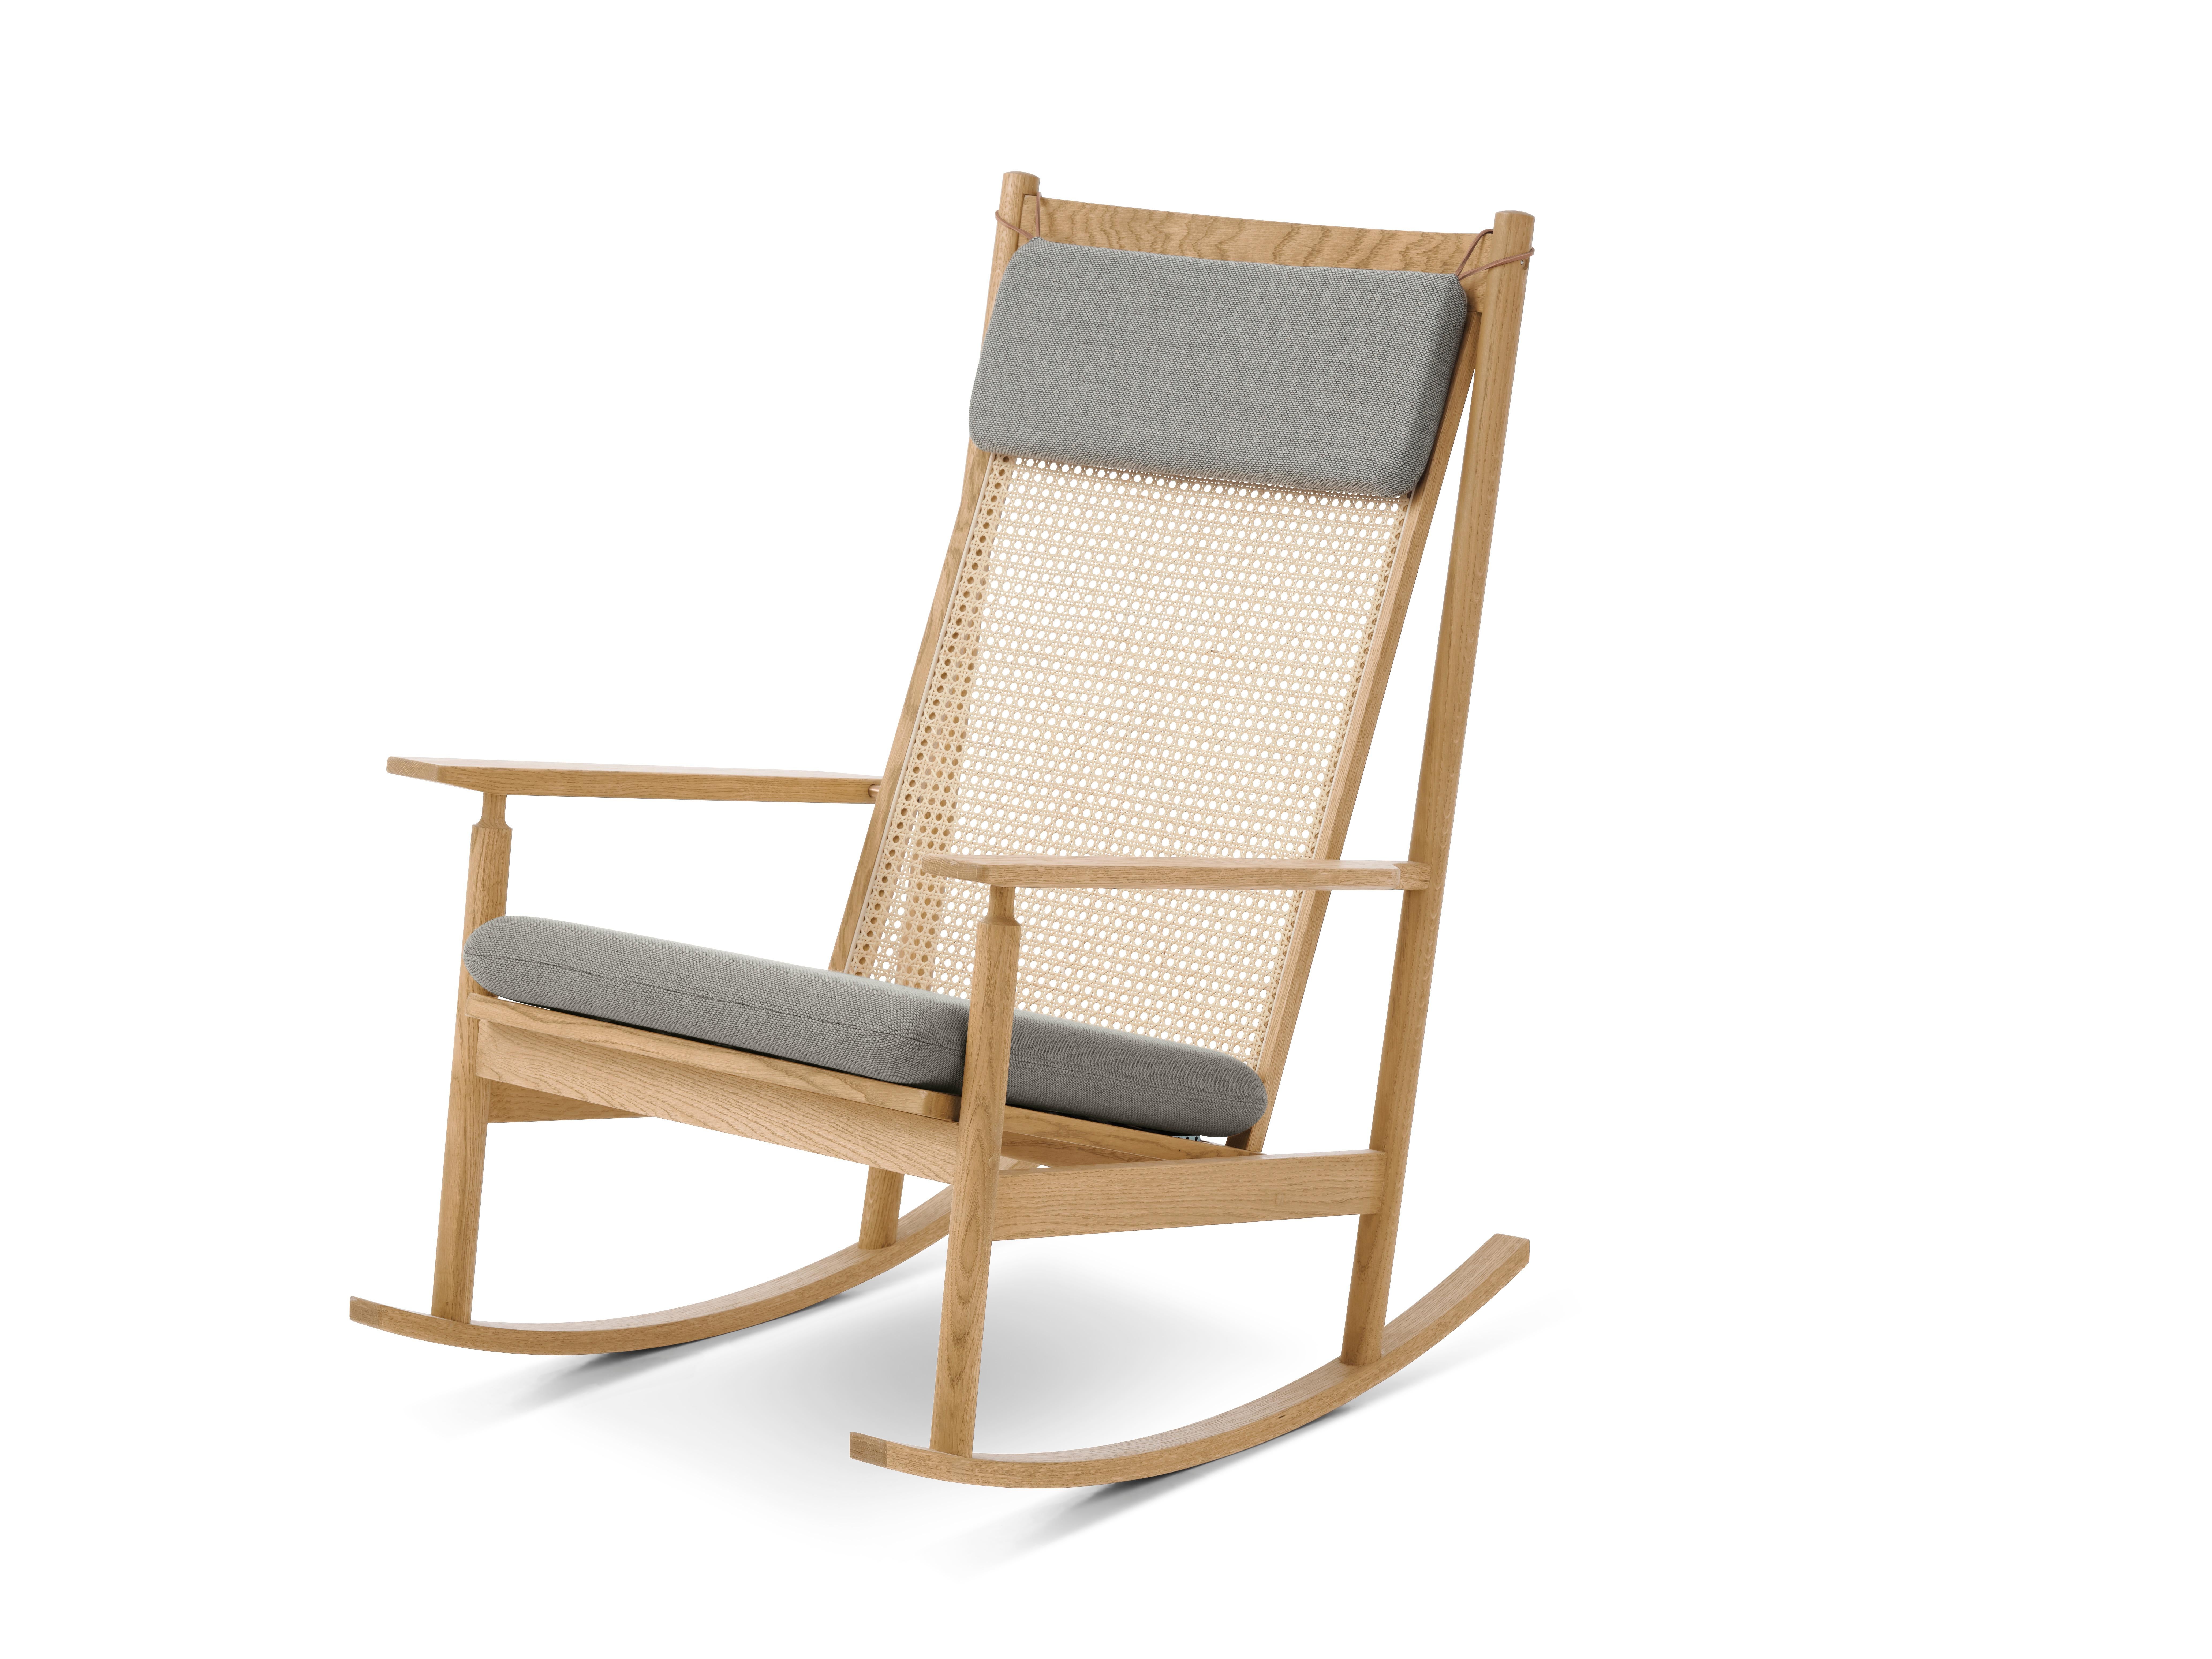 The Classic swing rocking chair was designed in 1956 by the architect Hans Olsen, who conducted extensive experiments in his quest to come up with original furniture designs. The chair, also known as Model 532a, was originally produced by the Danish